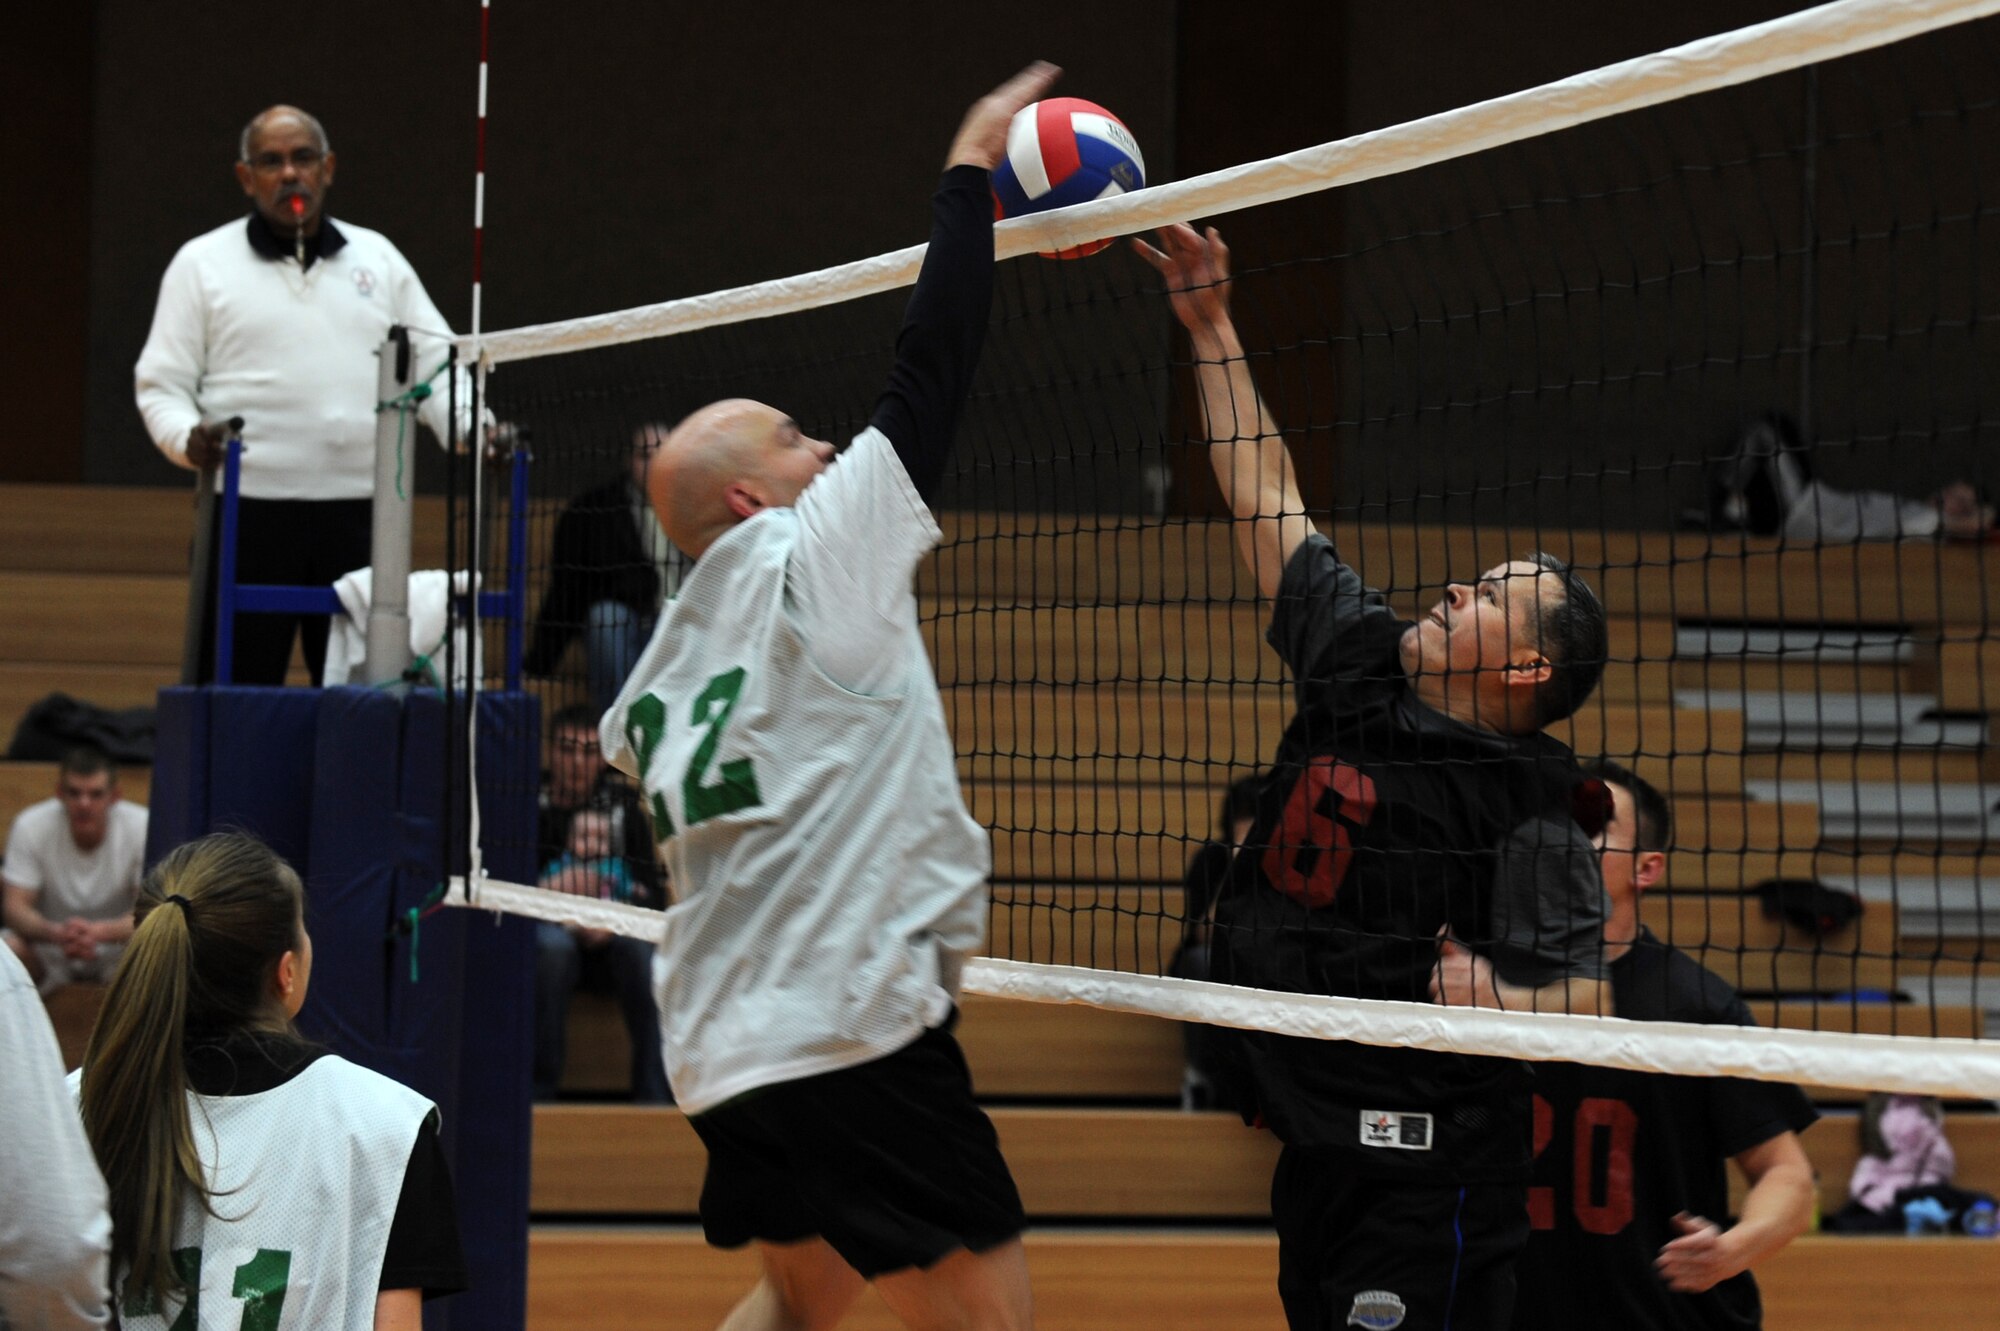 SPANGDAHLEM AIR BASE, Germany – Troy Soeder, 606th Air Control Squadron, number 22, and Jose Murillofierro, 52nd Force Support Squadron, number 6, both go for the the ball during an intramural volleyball game at the Skelton Memorial Fitness Center here Feb. 15. FSS defeated ACS in two sets, 25-16 and 26-24.  This match kicked off the intramural volleyball season, and games will be played Monday – Thursday beginning at 6:30 p.m. at the fitness center. (U.S. Air Force photo by Airman 1st Class Matthew B. Fredericks/Released)